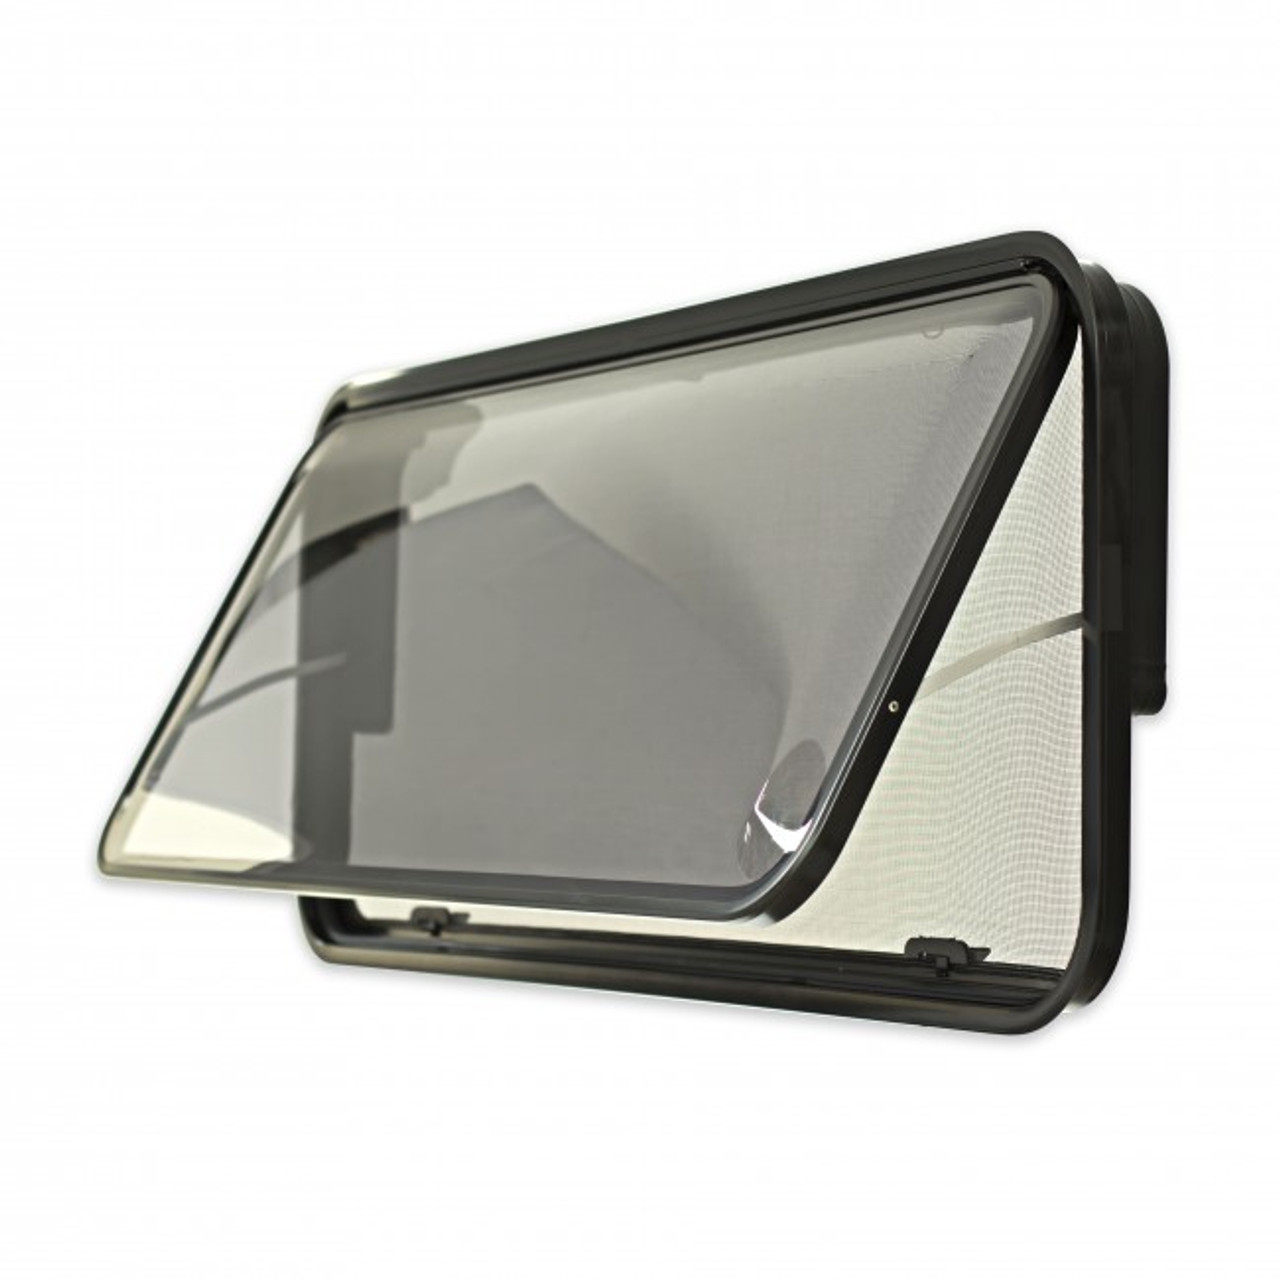 380 h x 457 w Odyssey Plus Caravan Window - Black Frame , with 29mm Clamp  Front View | 41292